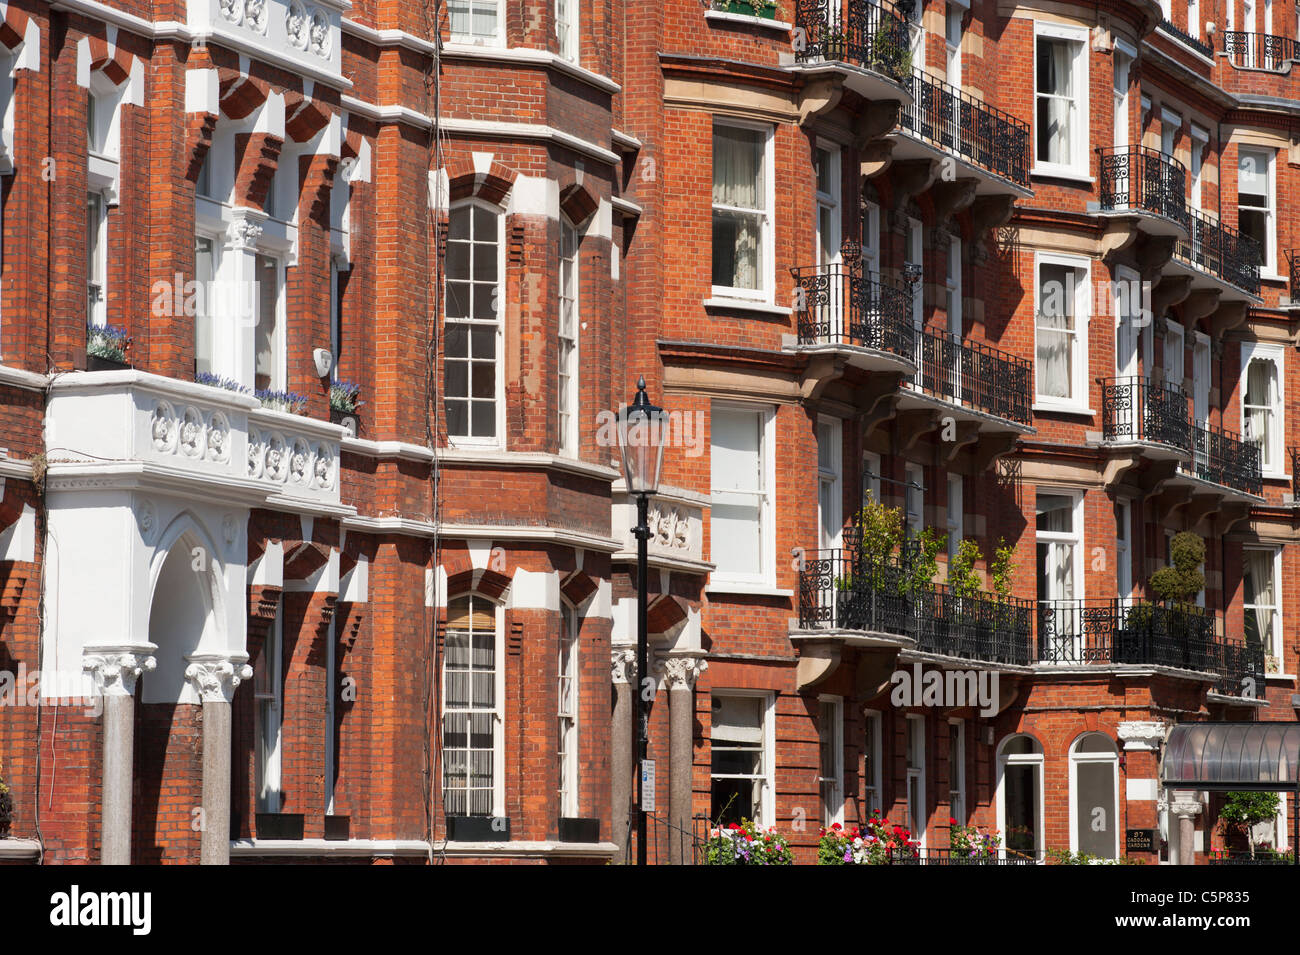 Typical expensive but high density housing on the Cadogan Estate to the North of Sloane Square, Chelsea, London, England, UK. Stock Photo